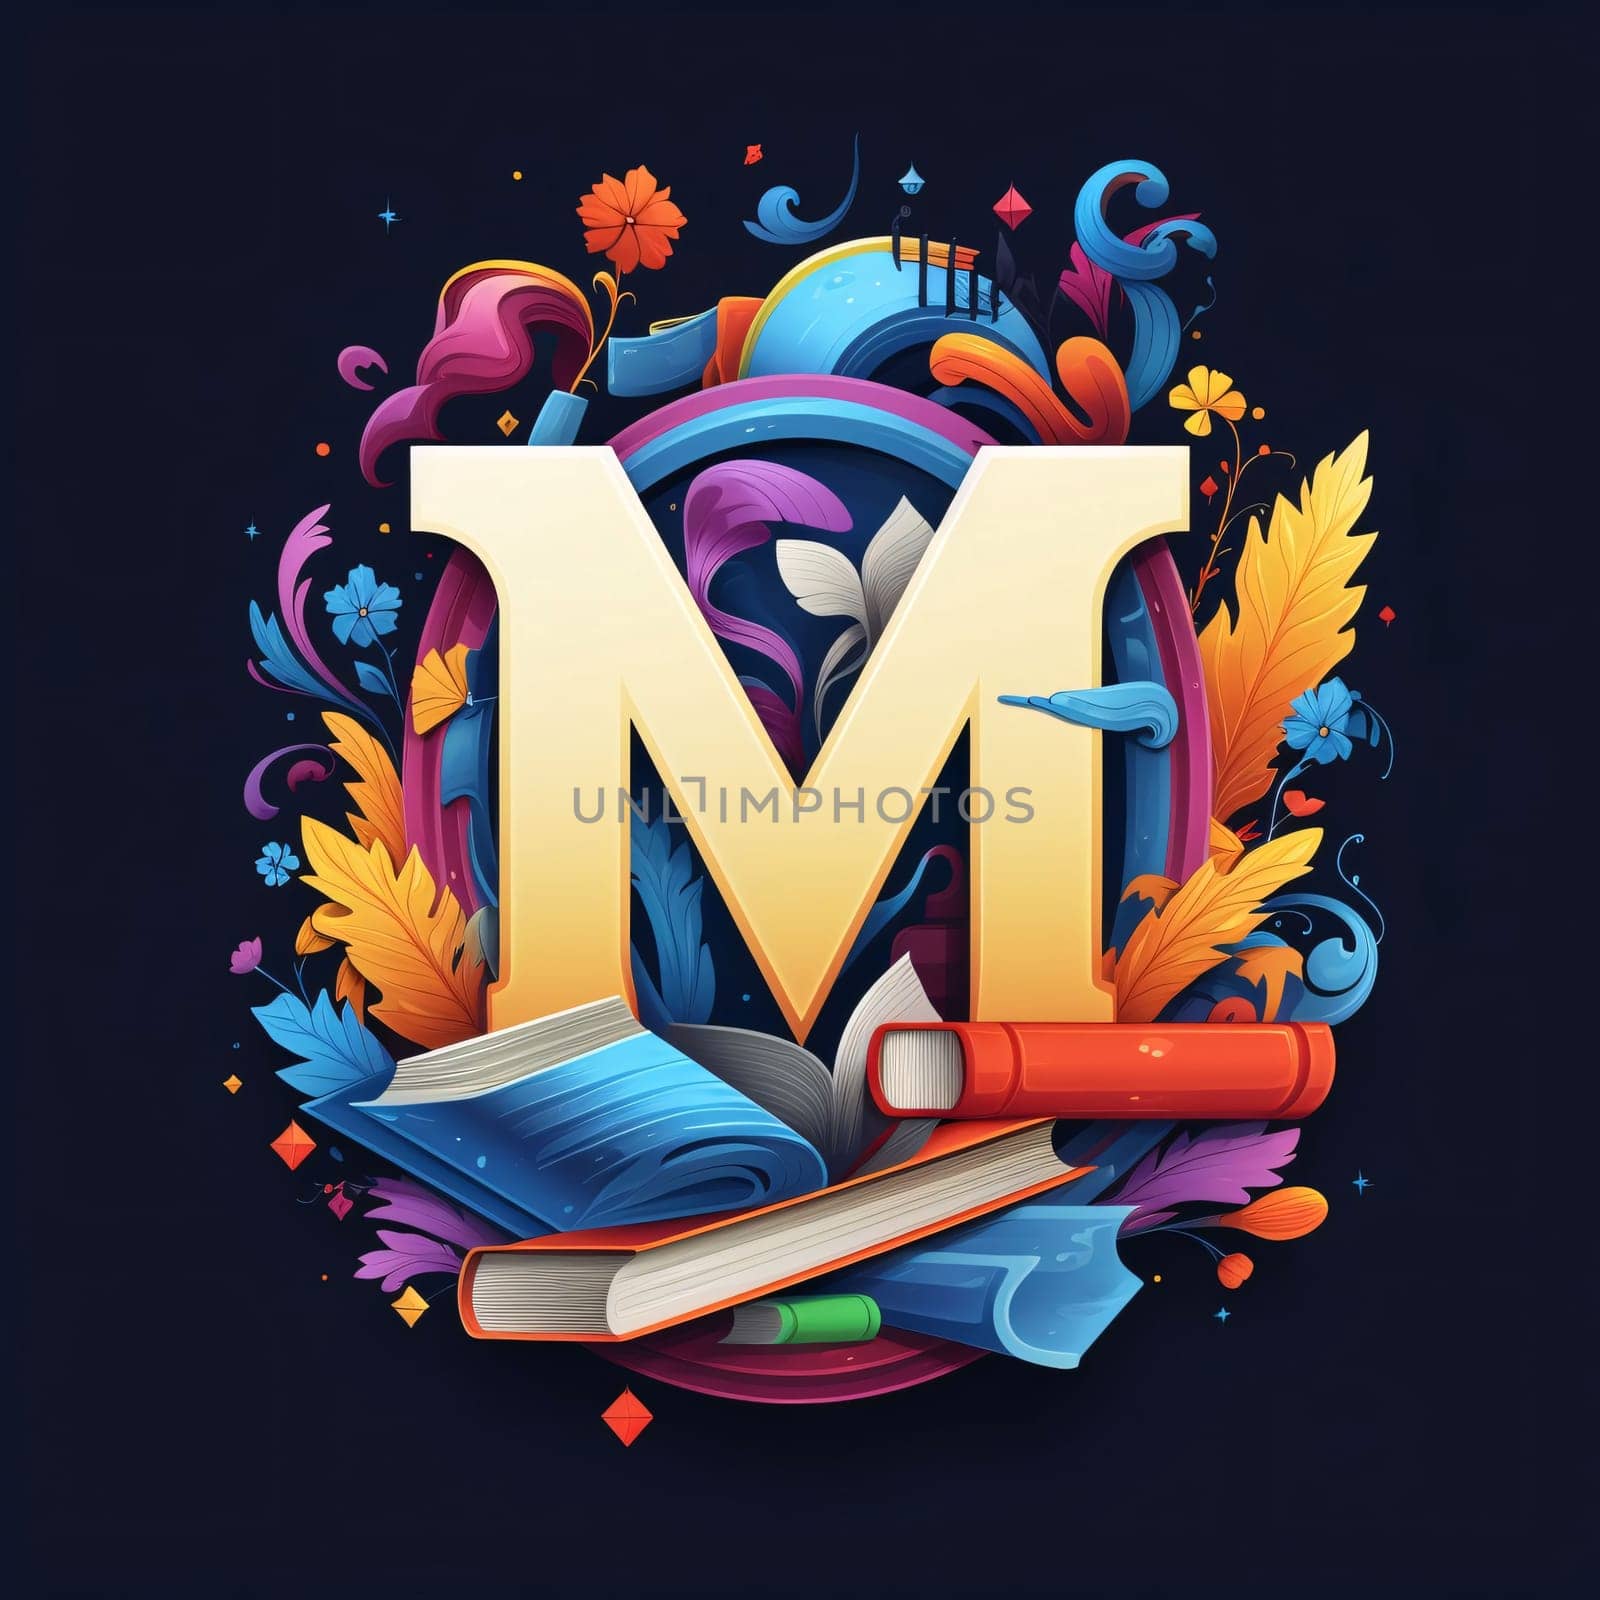 Graphic alphabet letters: Vector illustration of letter M with colorful floral elements on dark background.